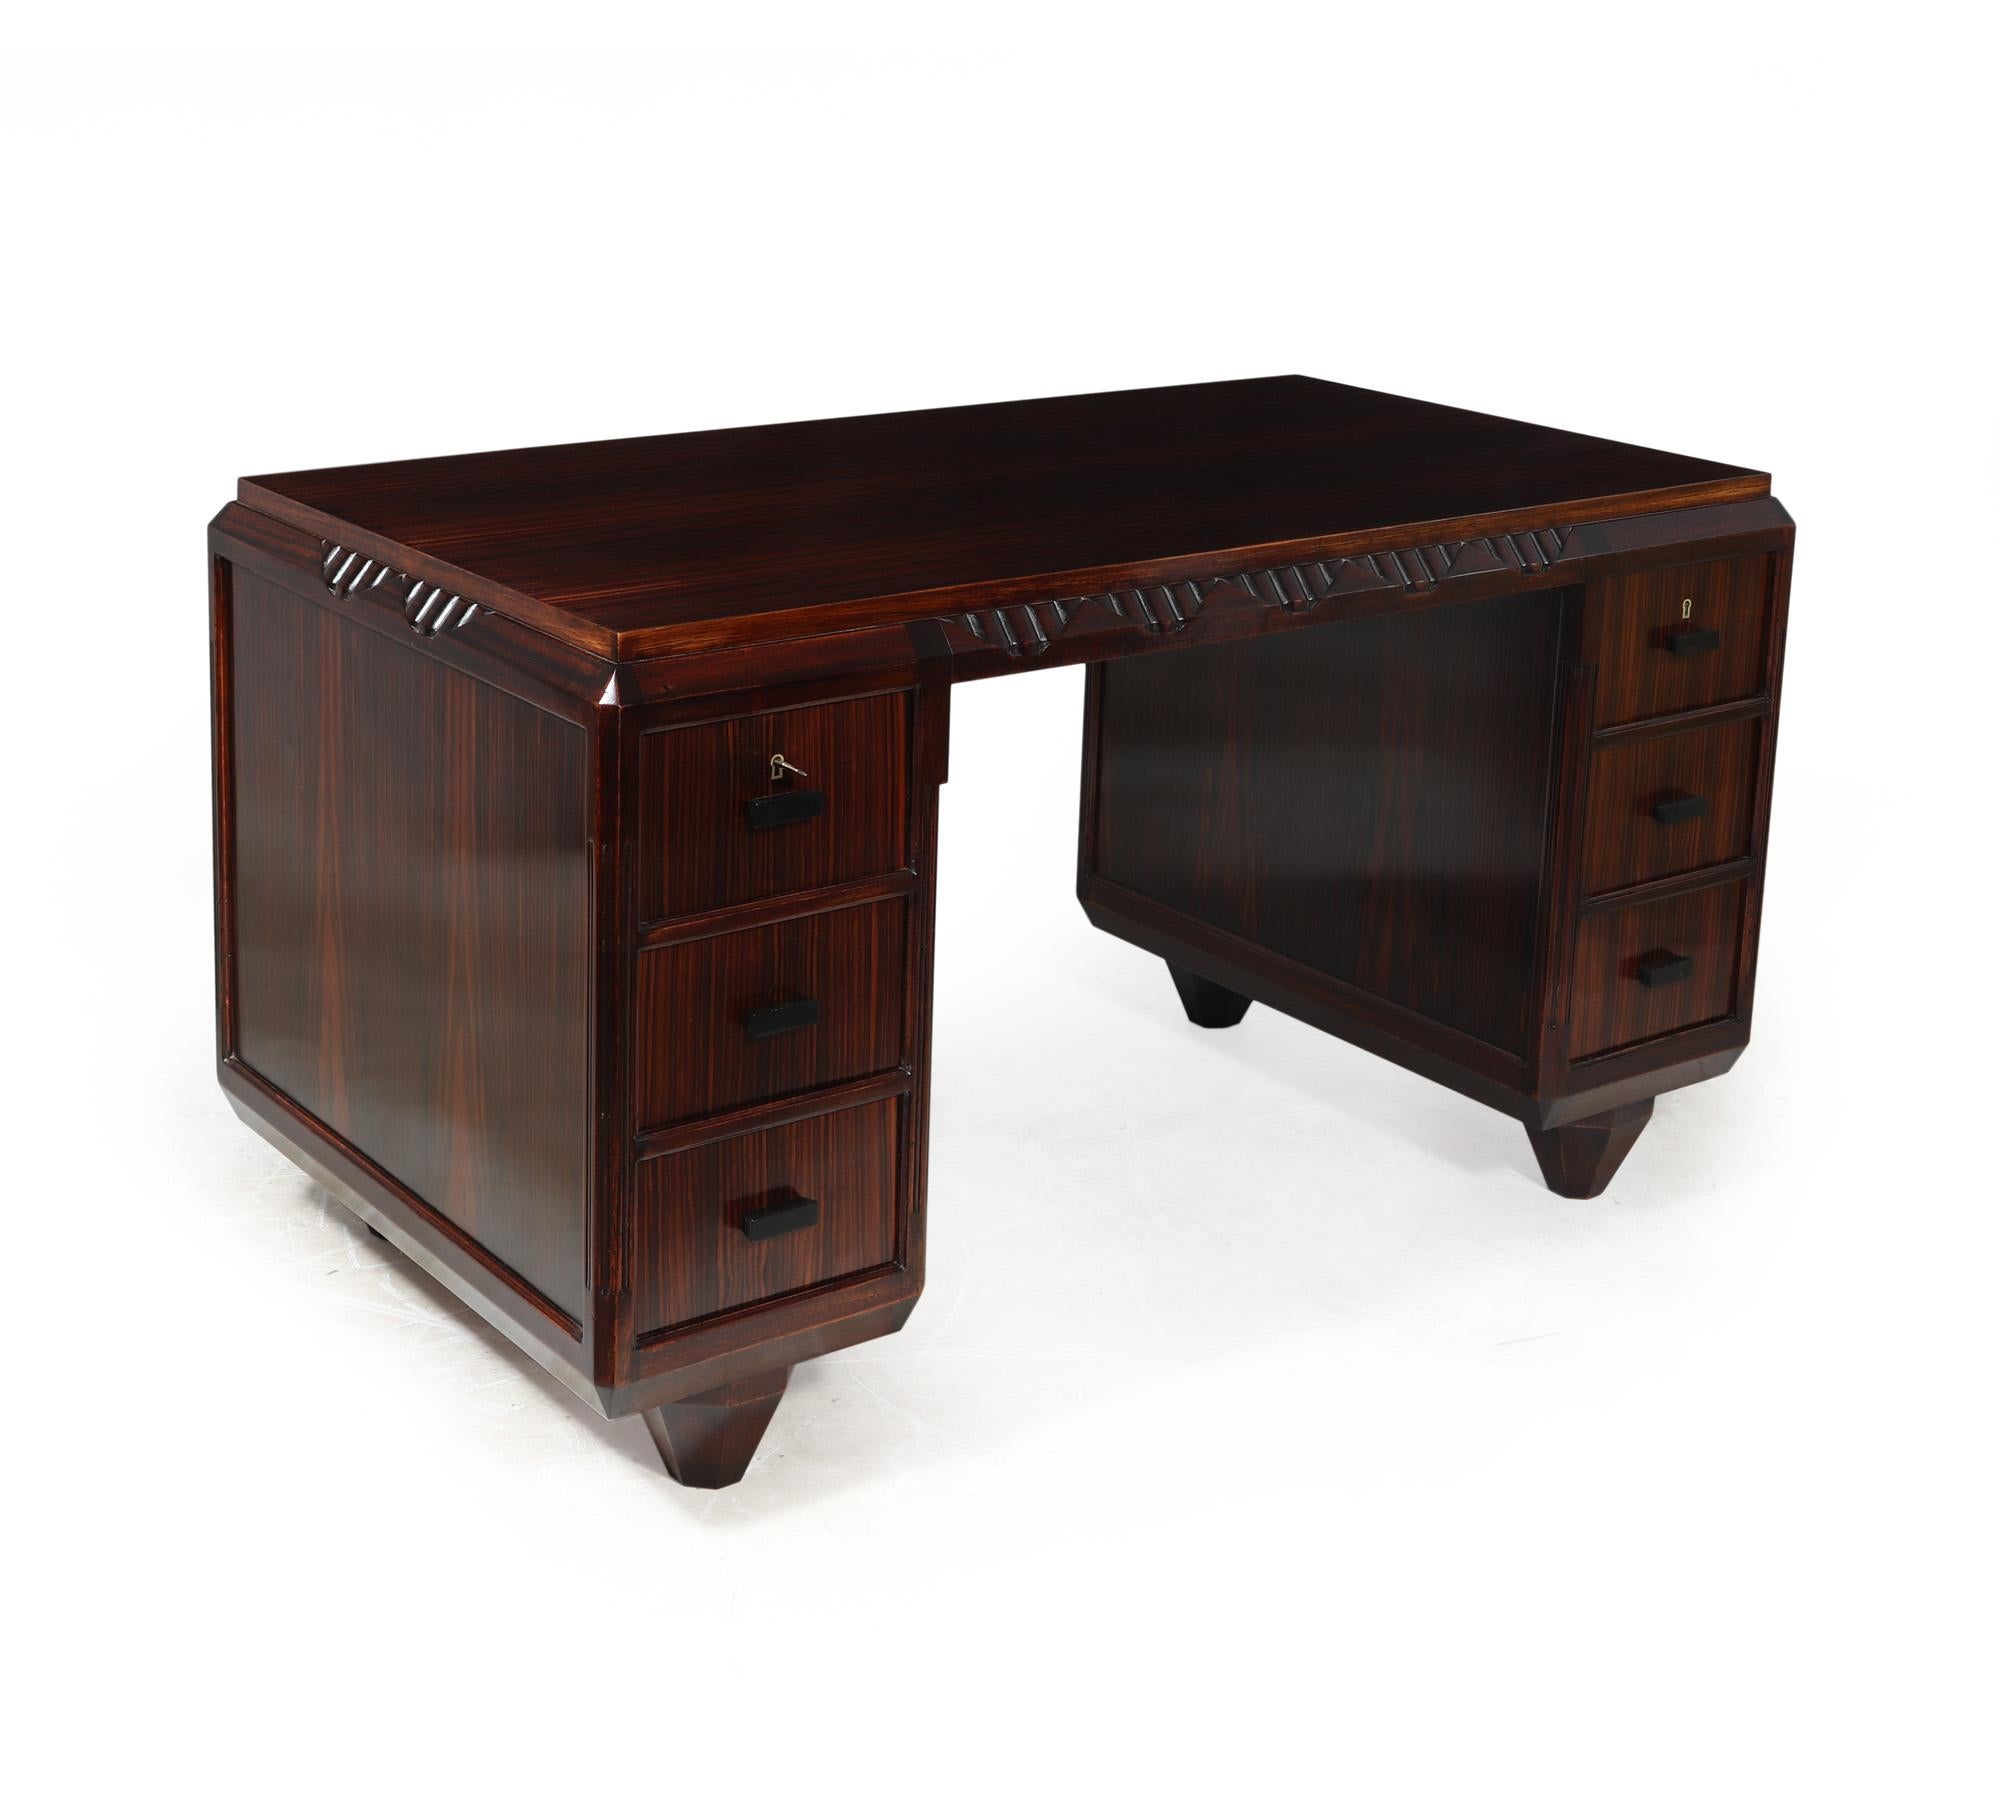 Art Deco Desk - By Louis Majorelle

Exceptional quality Art Deco desk produced in France c1925, in Macassar Ebony and stamped with his unique inlay signature Majorelle Nancy to the inside of the lower left inside the kneehole , three drawers in each